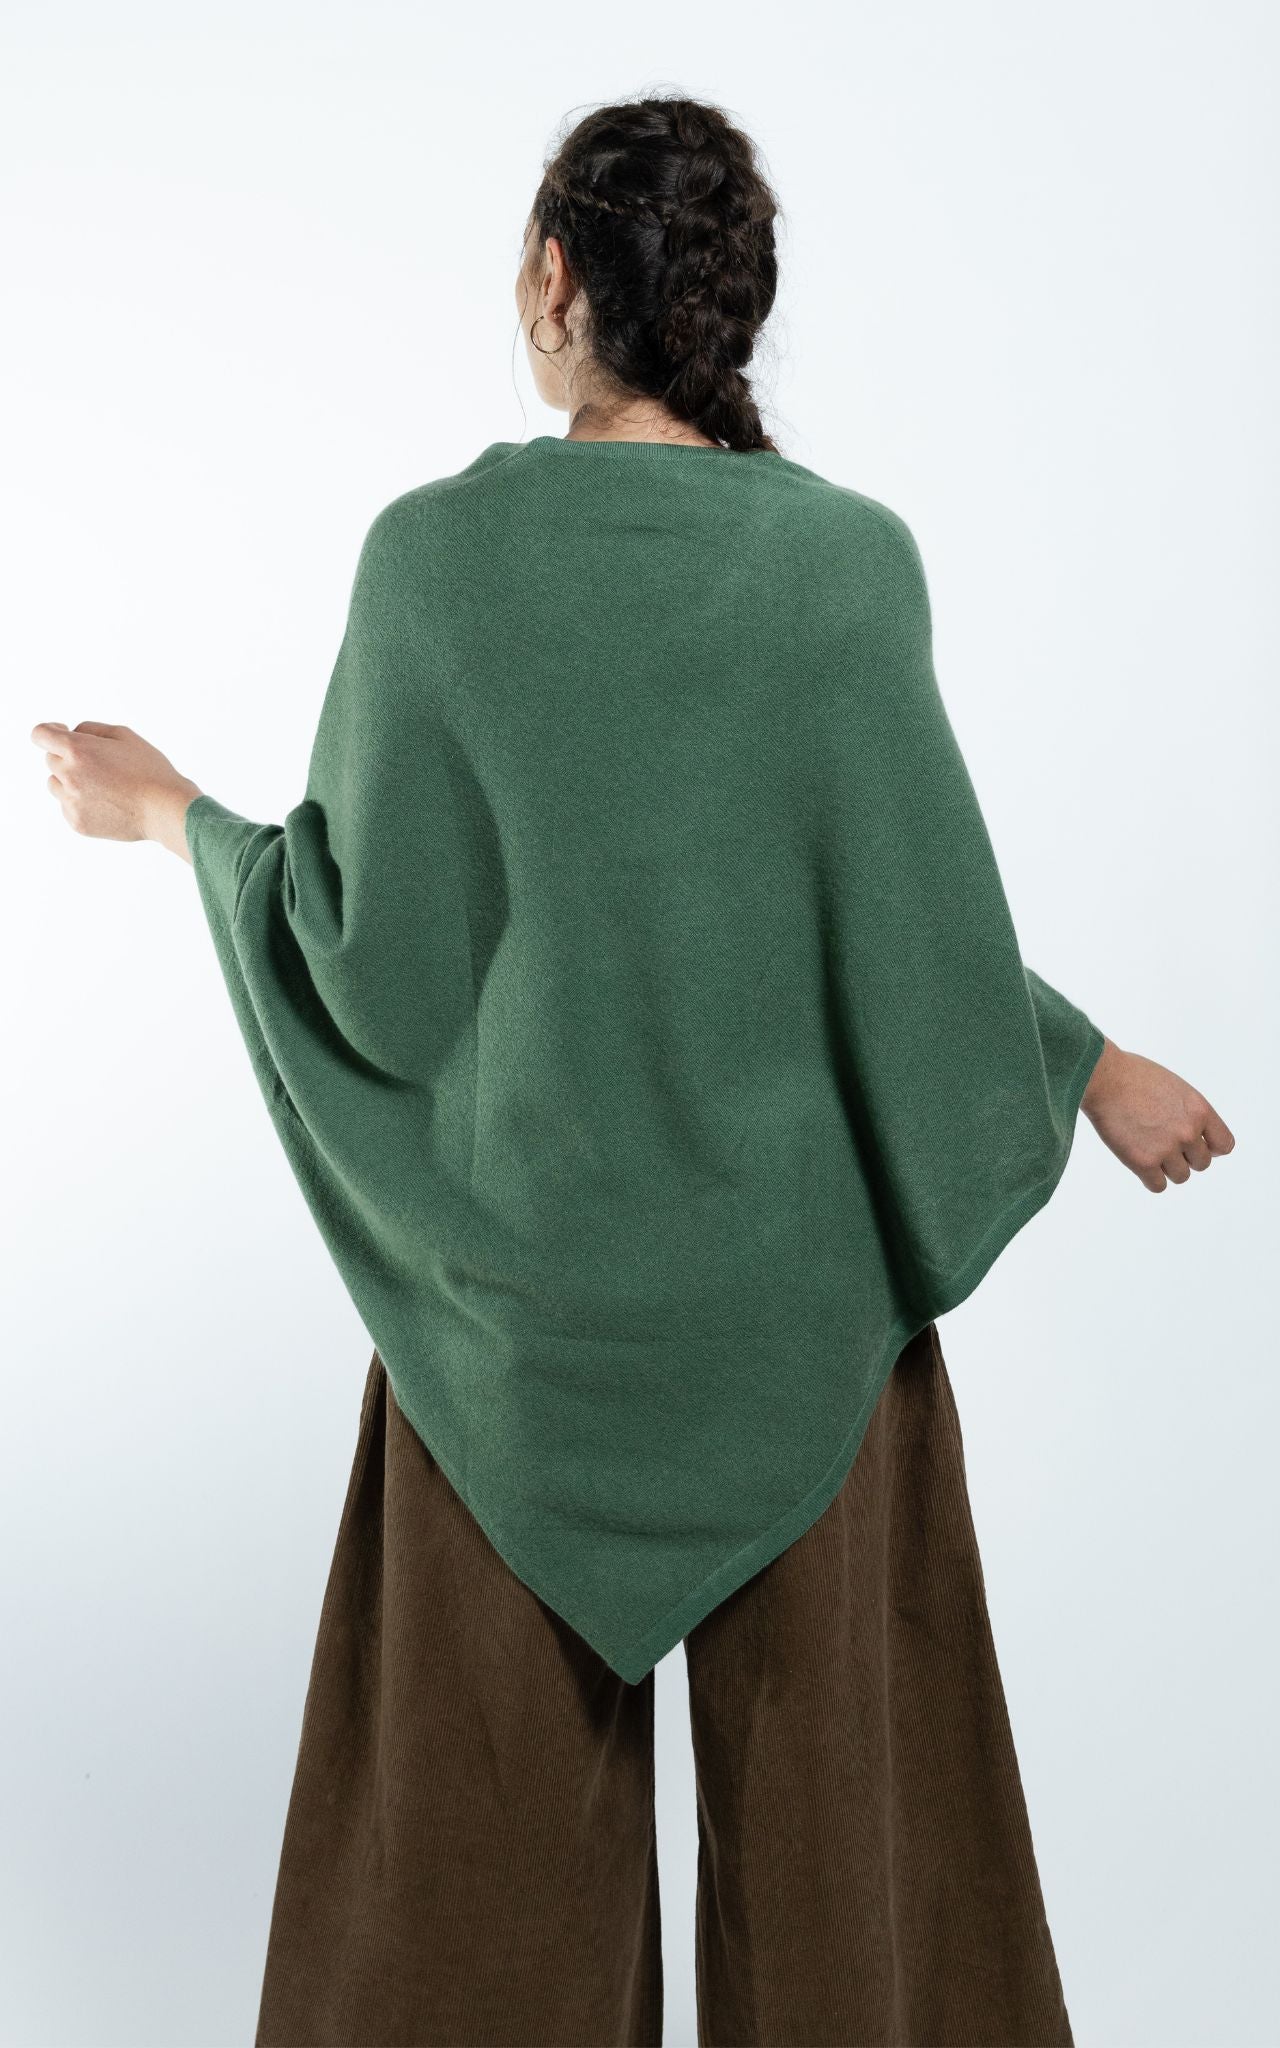 Surya Australia Ethical Cashmere Poncho made in Nepal - Teal